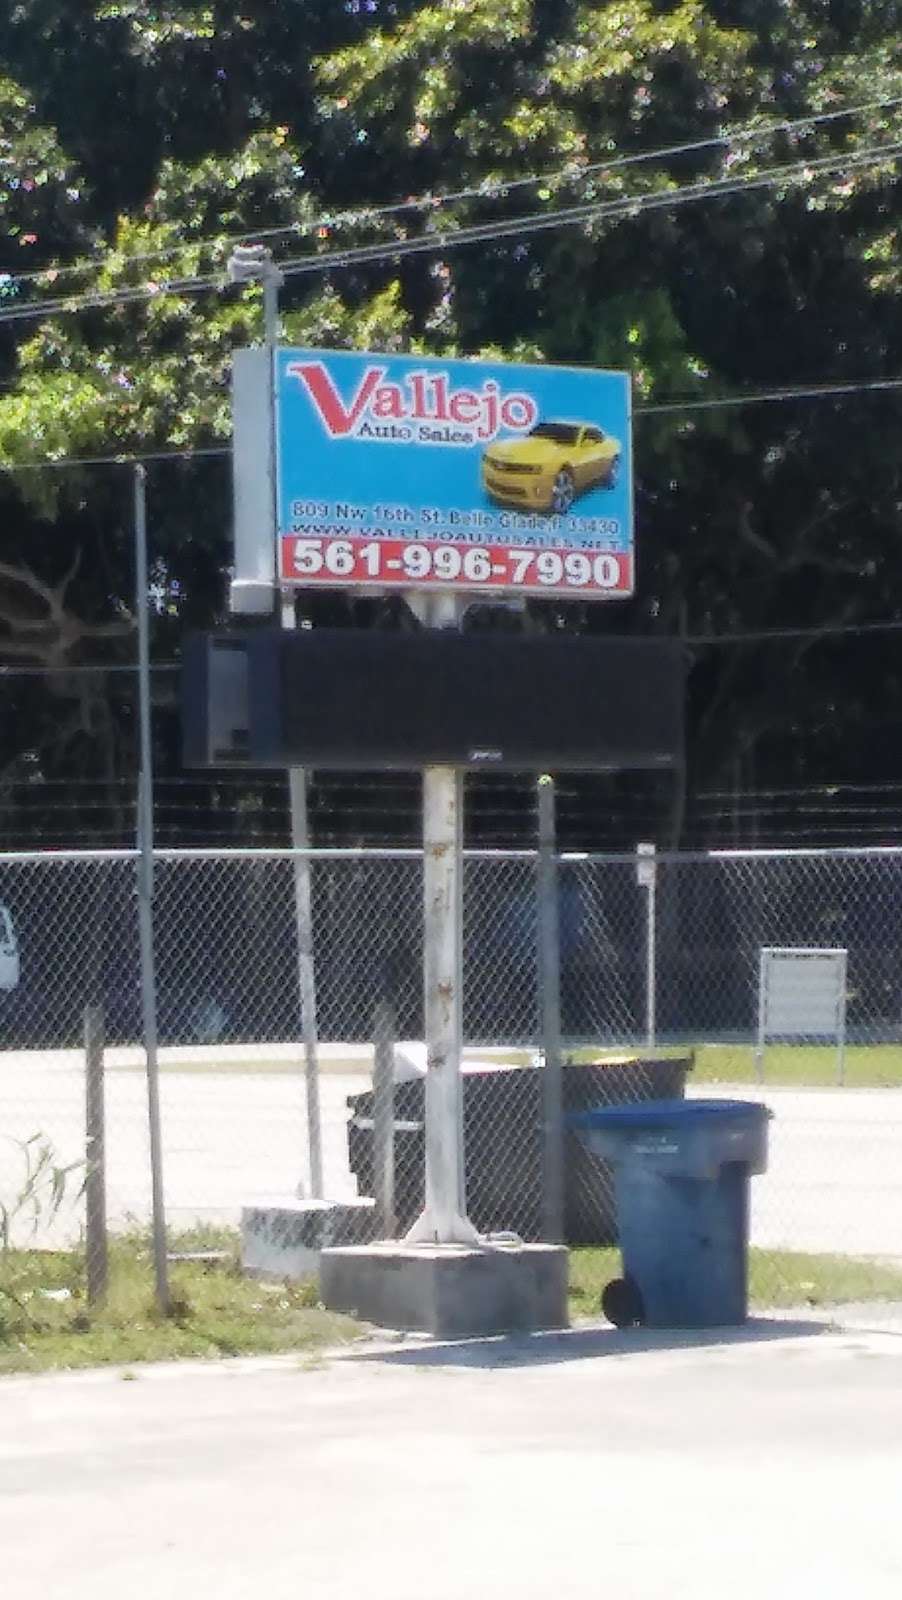 Vallejo Auto Sales | 733 NW 16th St, Belle Glade, FL 33430 | Phone: (561) 996-7990